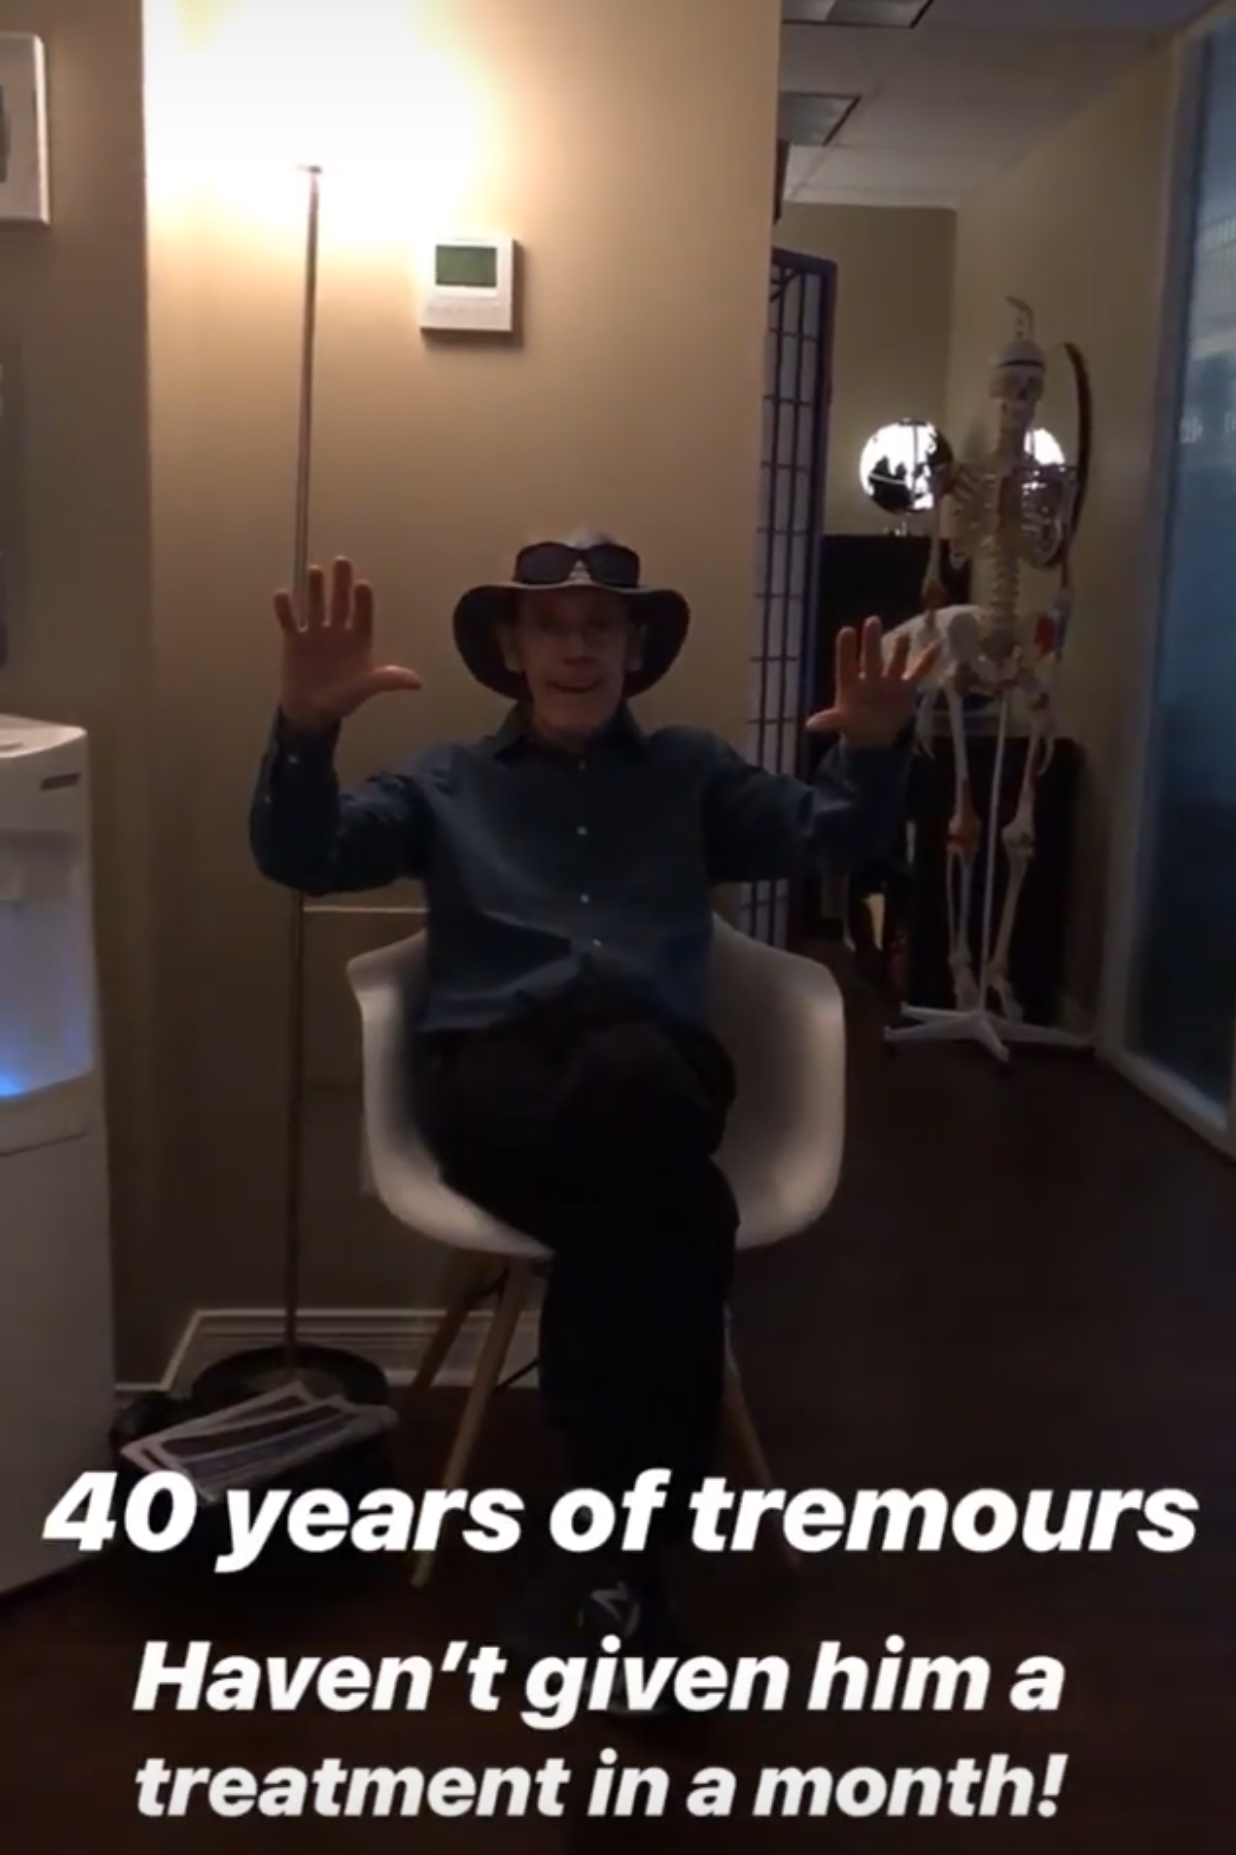  SuJok acupuncture treatment used for patient with uncontrolled tremors for 45 years. Treatment resulted in the elimination of such tremors after only one session.   